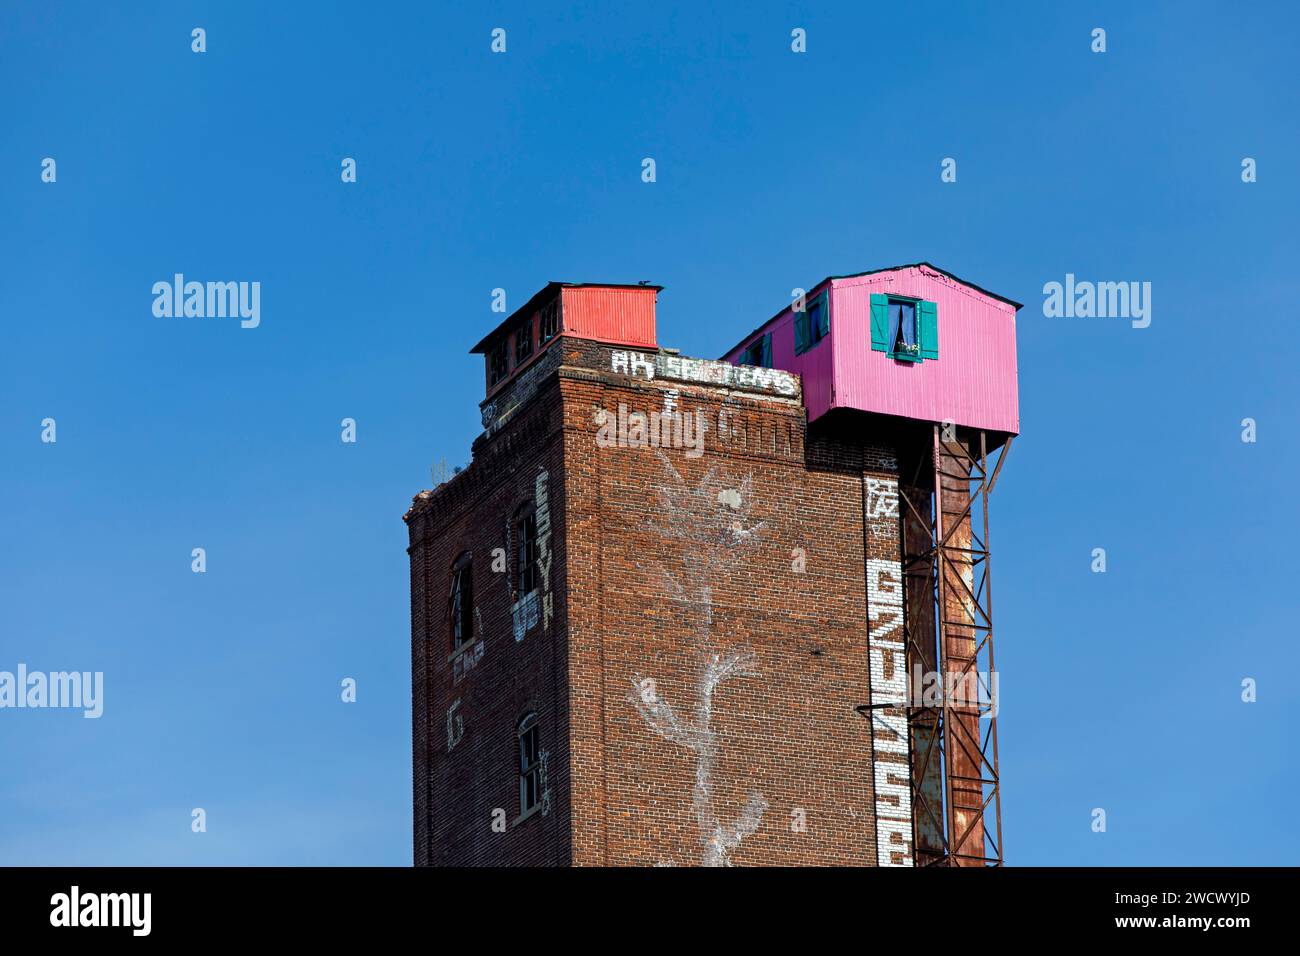 Canada, province of Quebec, Montreal, the surroundings of the Lachine Canal in the west of the city, the silos of the former Canada Malting Co factory, the mysterious little pink house at the top Stock Photo